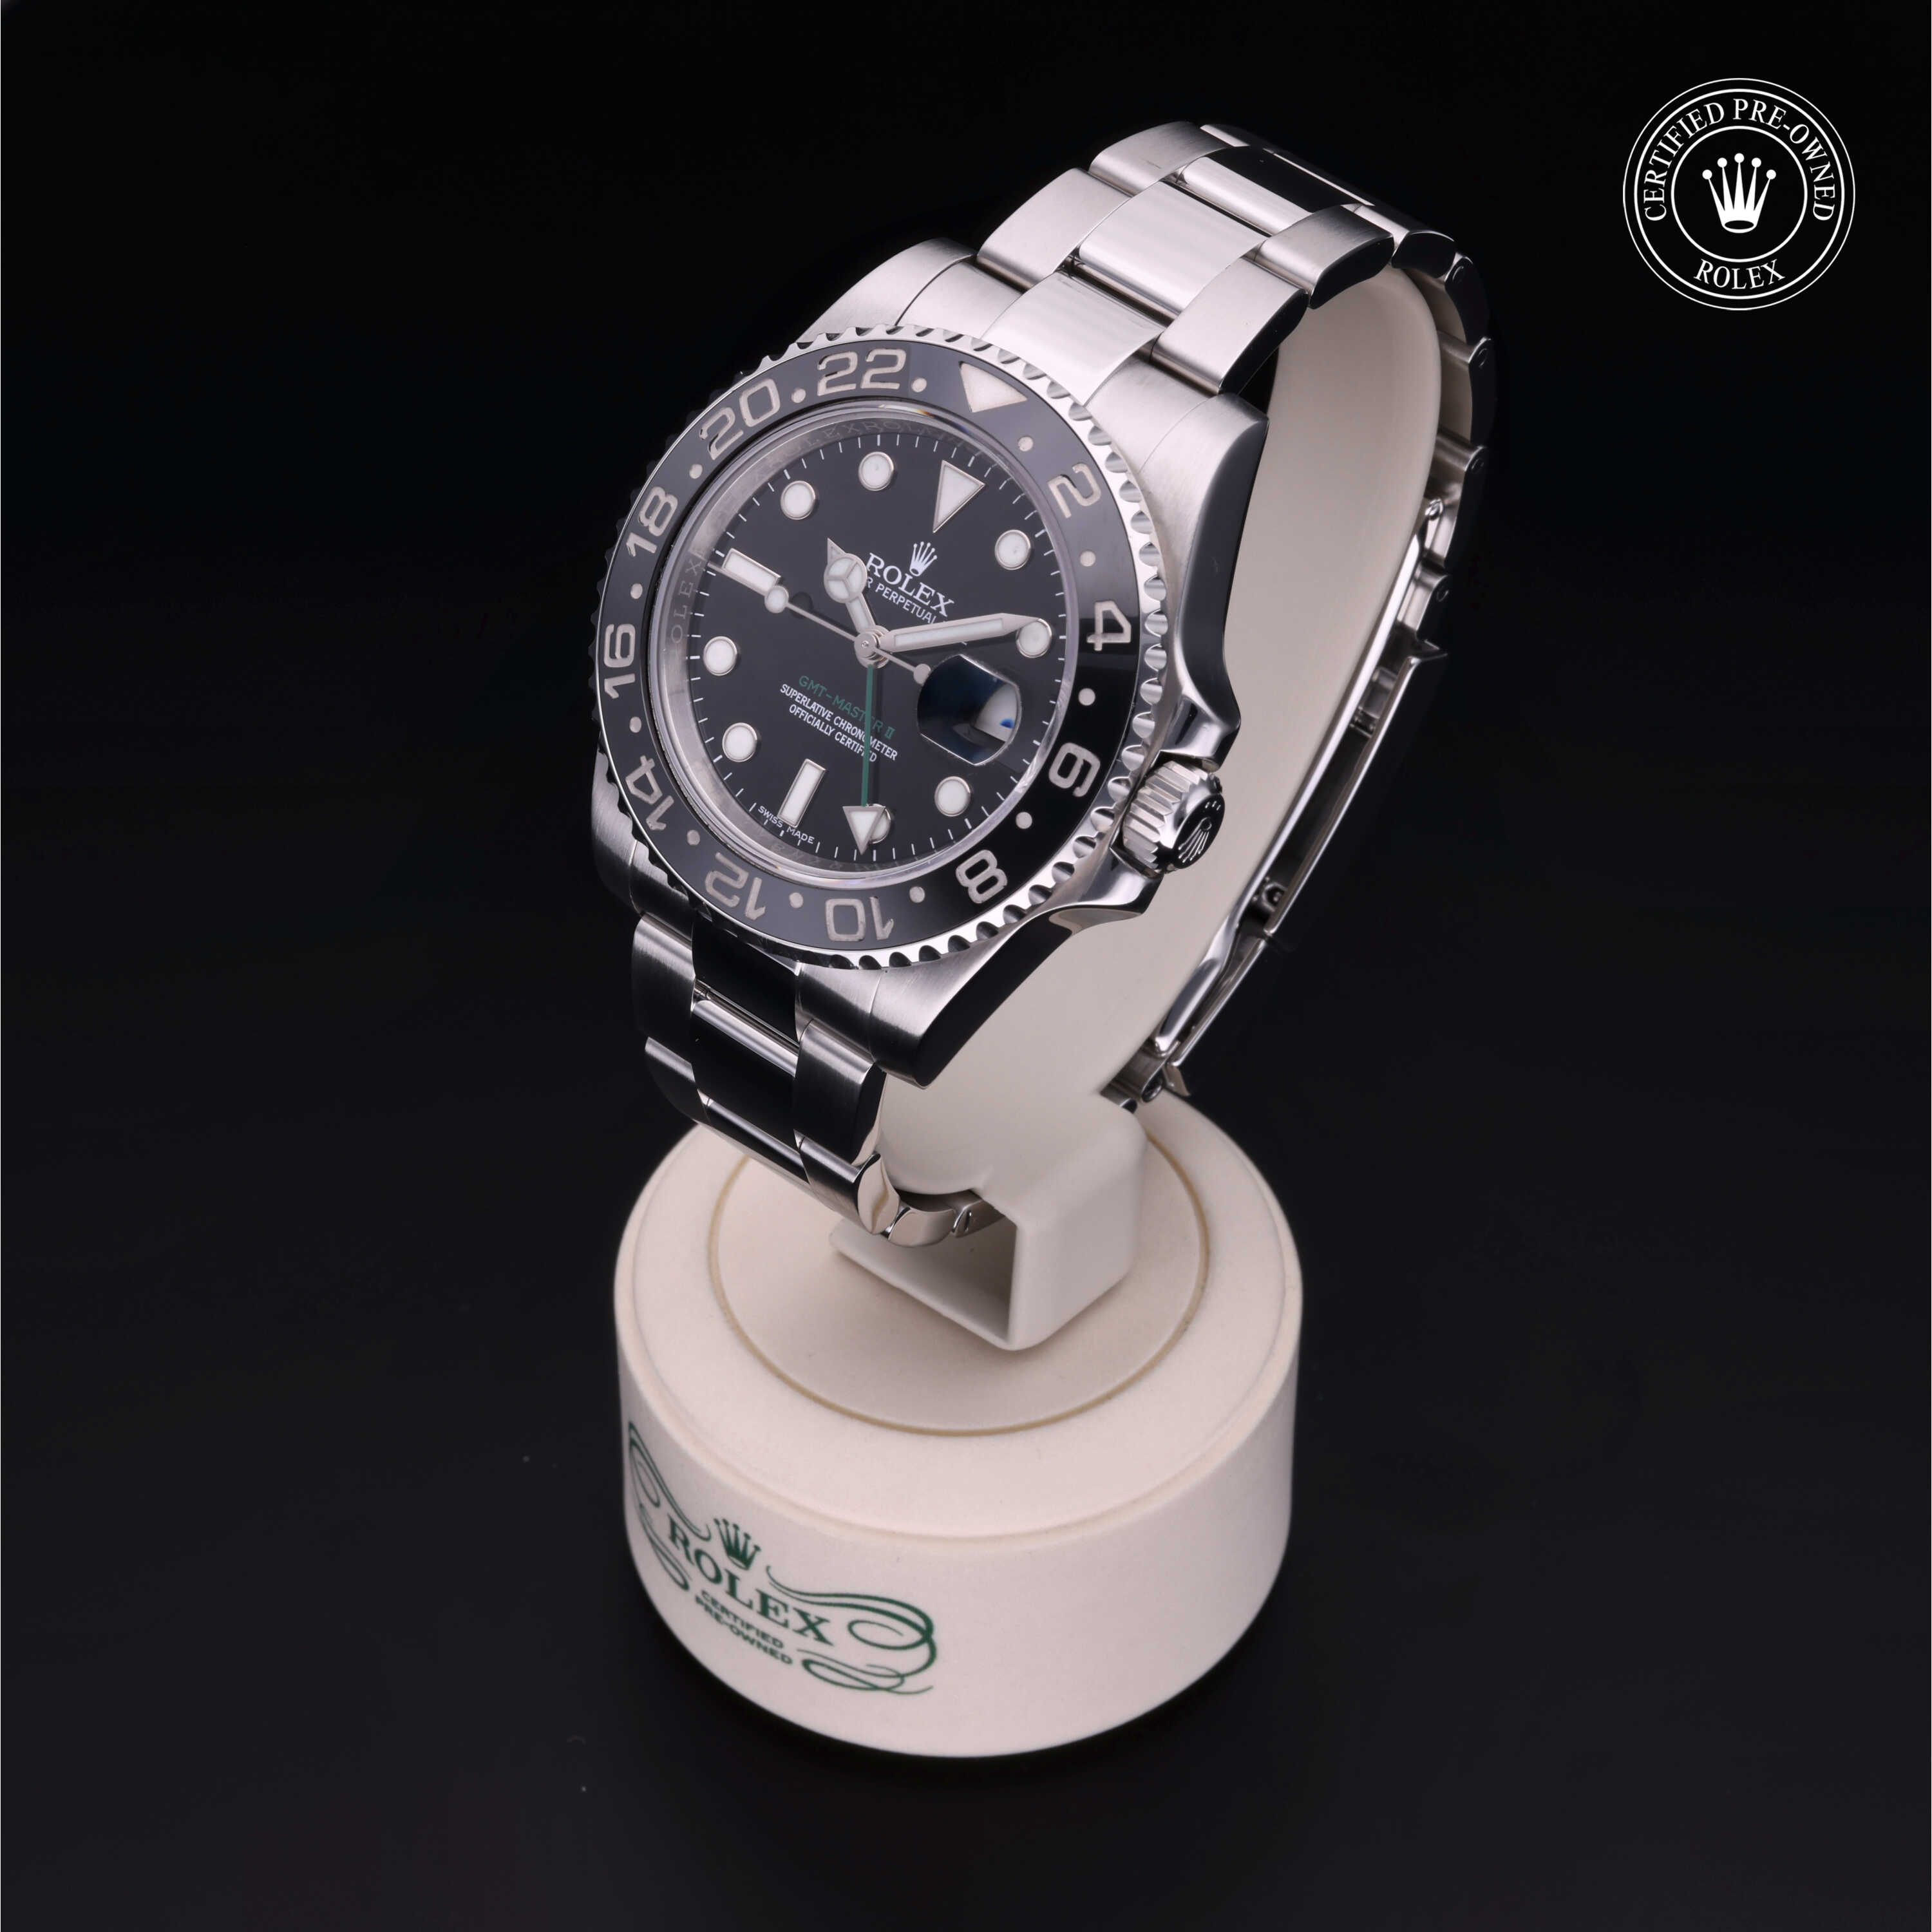 Rolex Certified Pre-Owned GMT-Master II (116710LN)